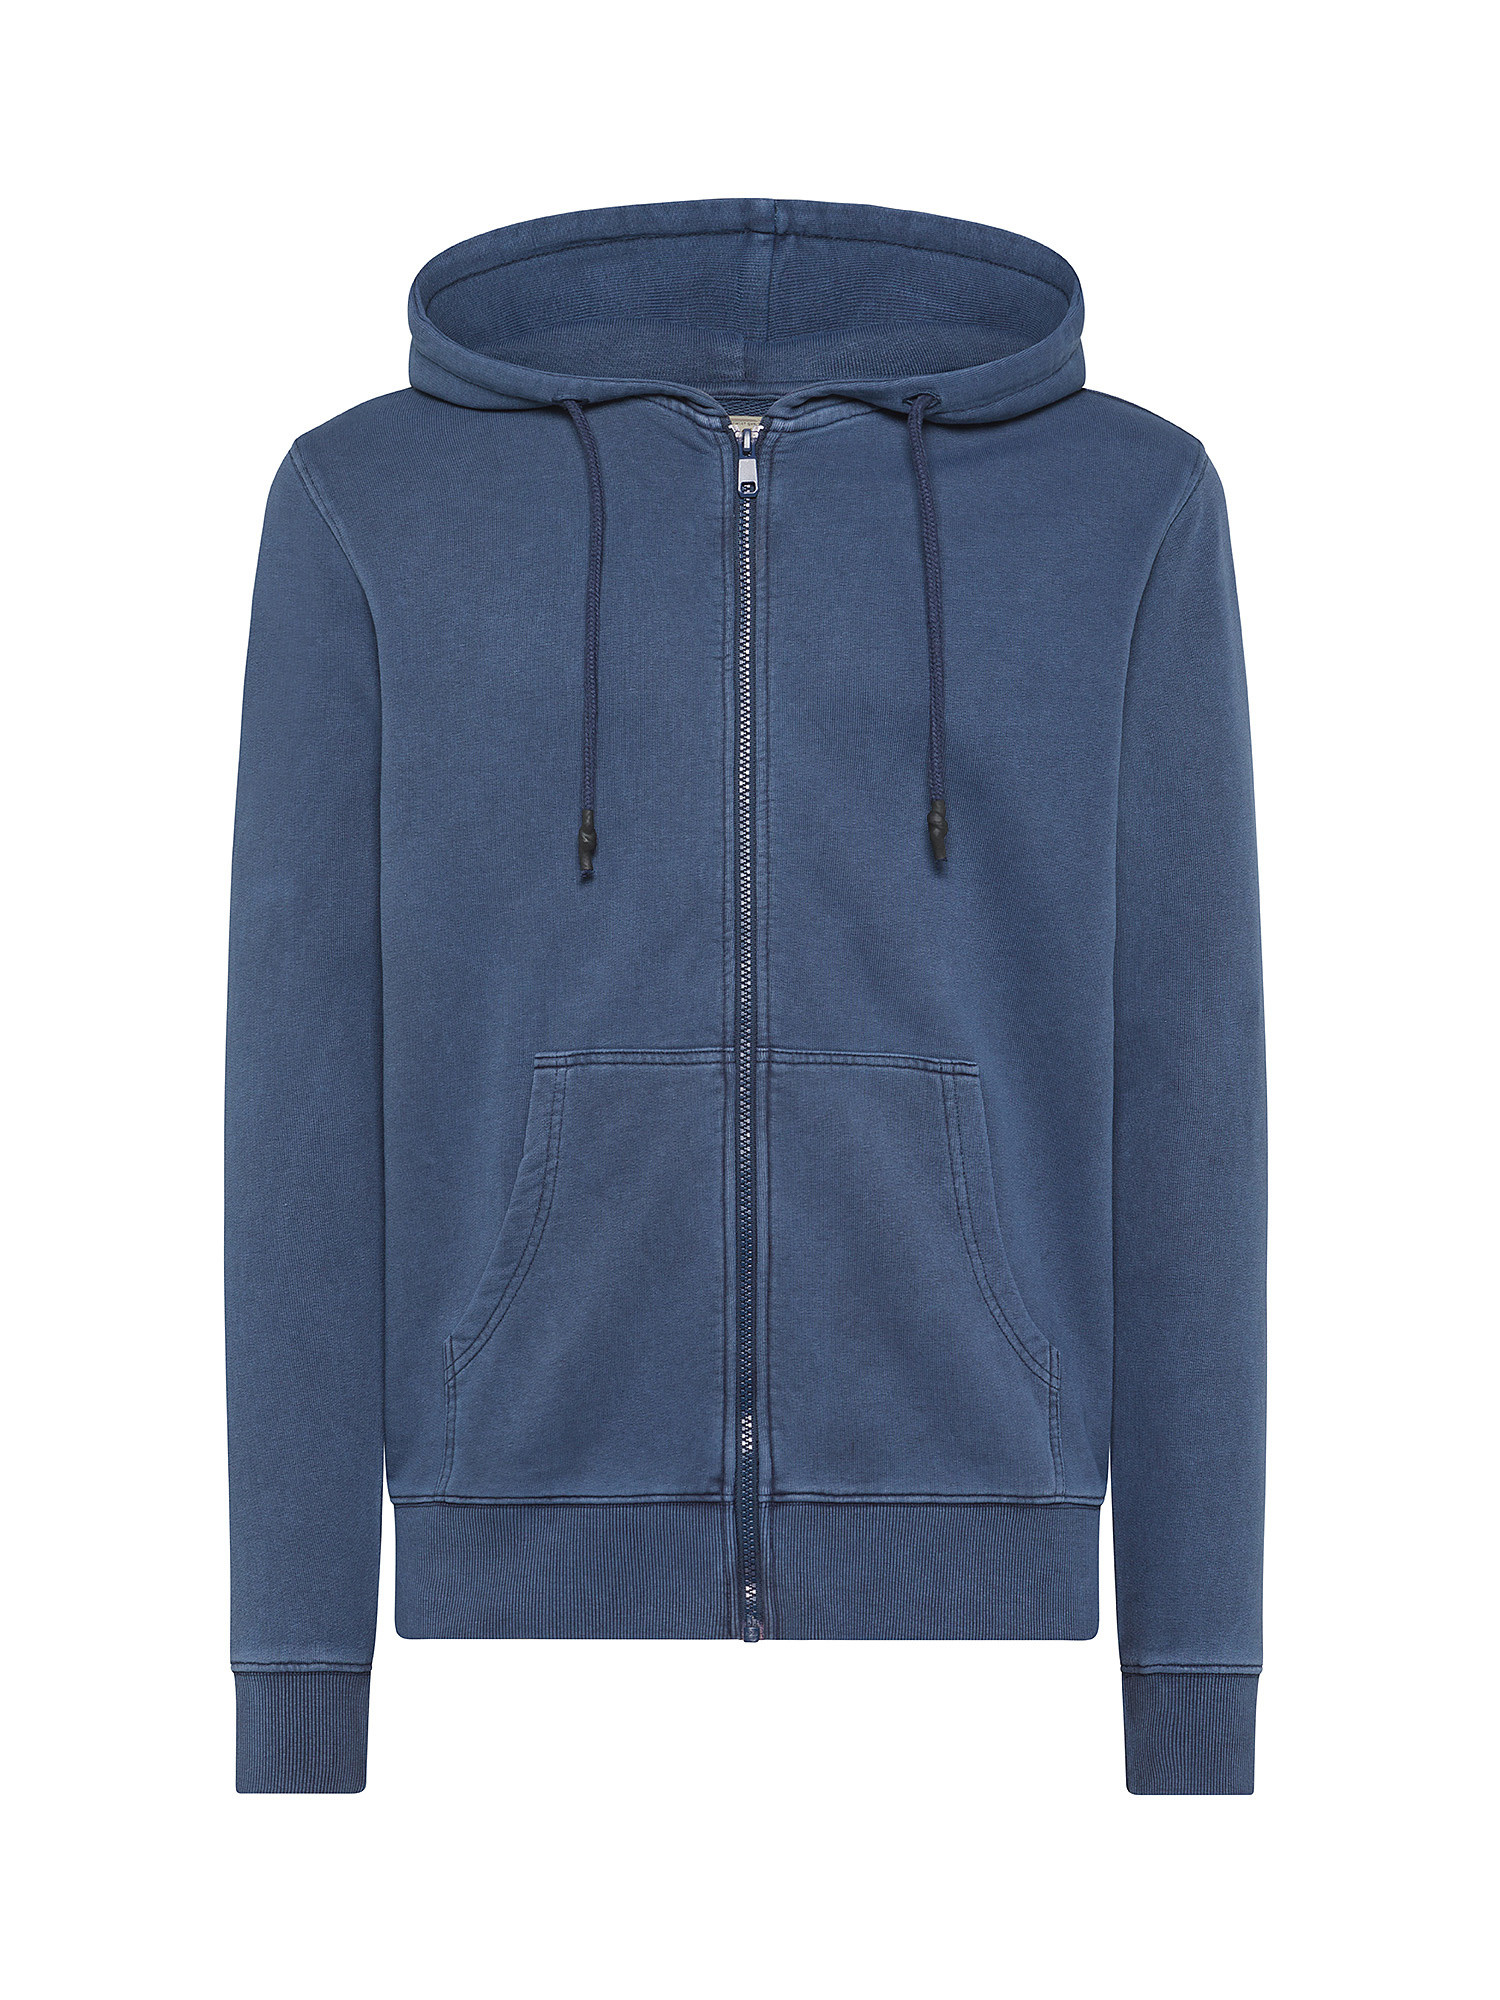 JCT - Pure cotton hooded sweatshirt, Blue, large image number 0